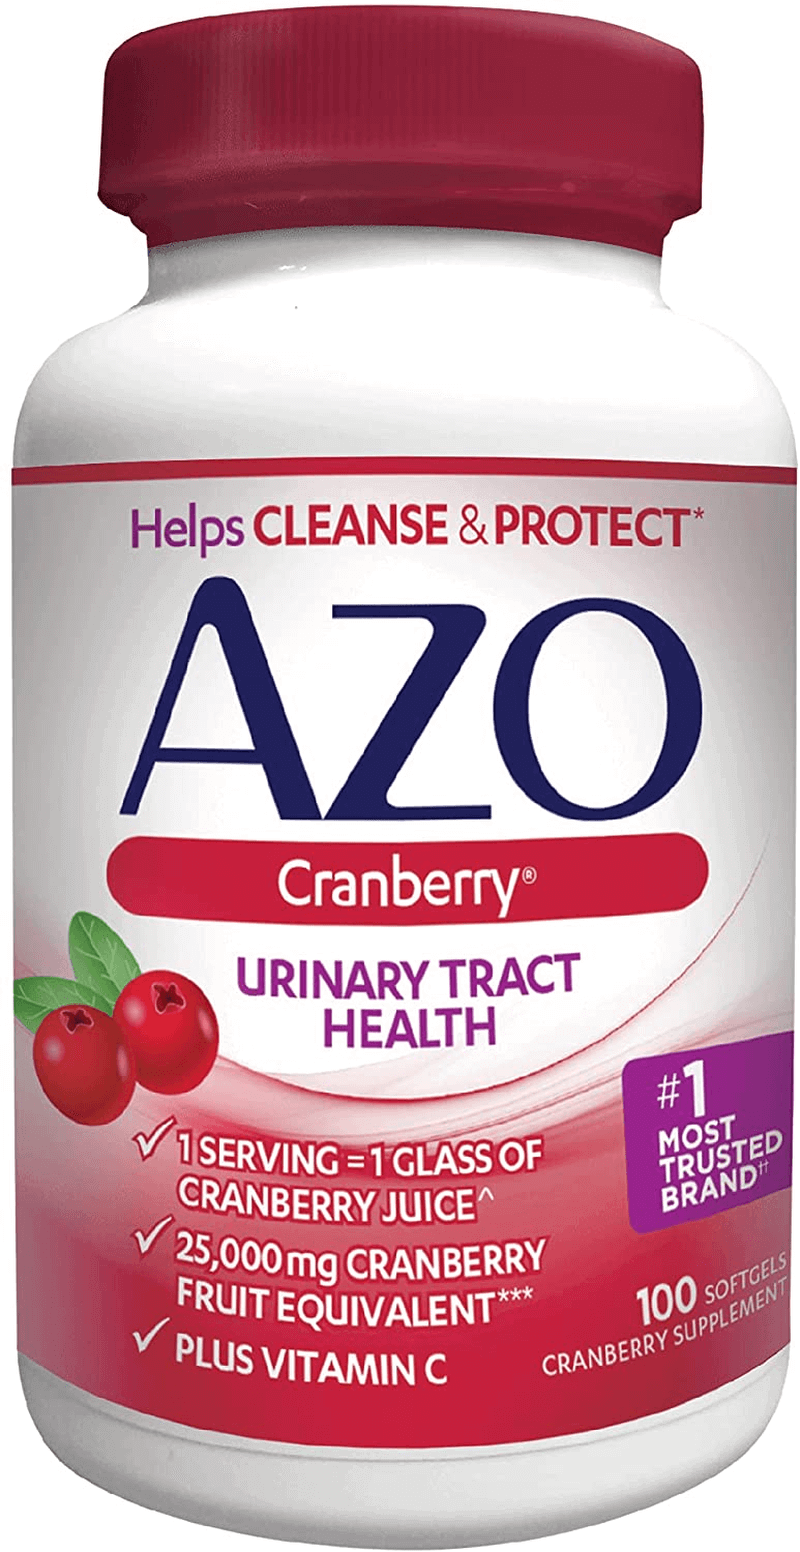 AZO Cranberry Urinary Tract Health Dietary Supplement, 1 Serving = 1 Glass of Cranberry Juice, Sugar Free, 100 Softgels - vitamenstore.com